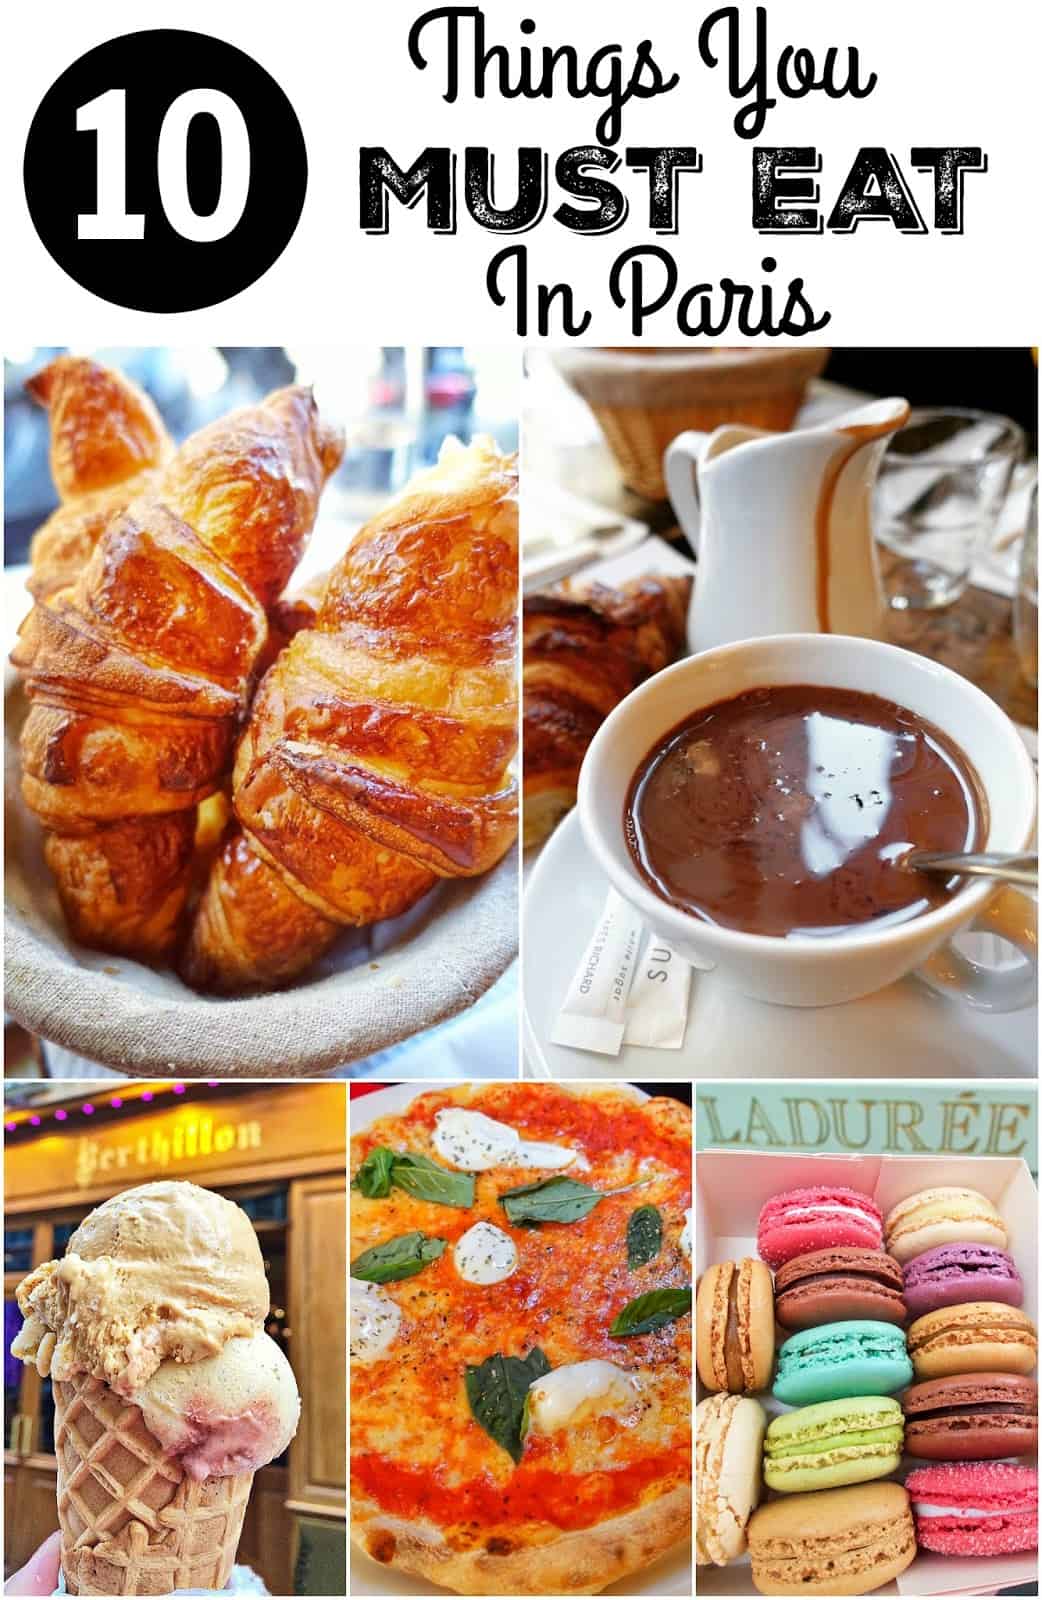 10 things you MUST EAT in Paris! Pin this for a fabulous list of places to eat. Includes addresses and phone numbers so you can easily find them on your trip.